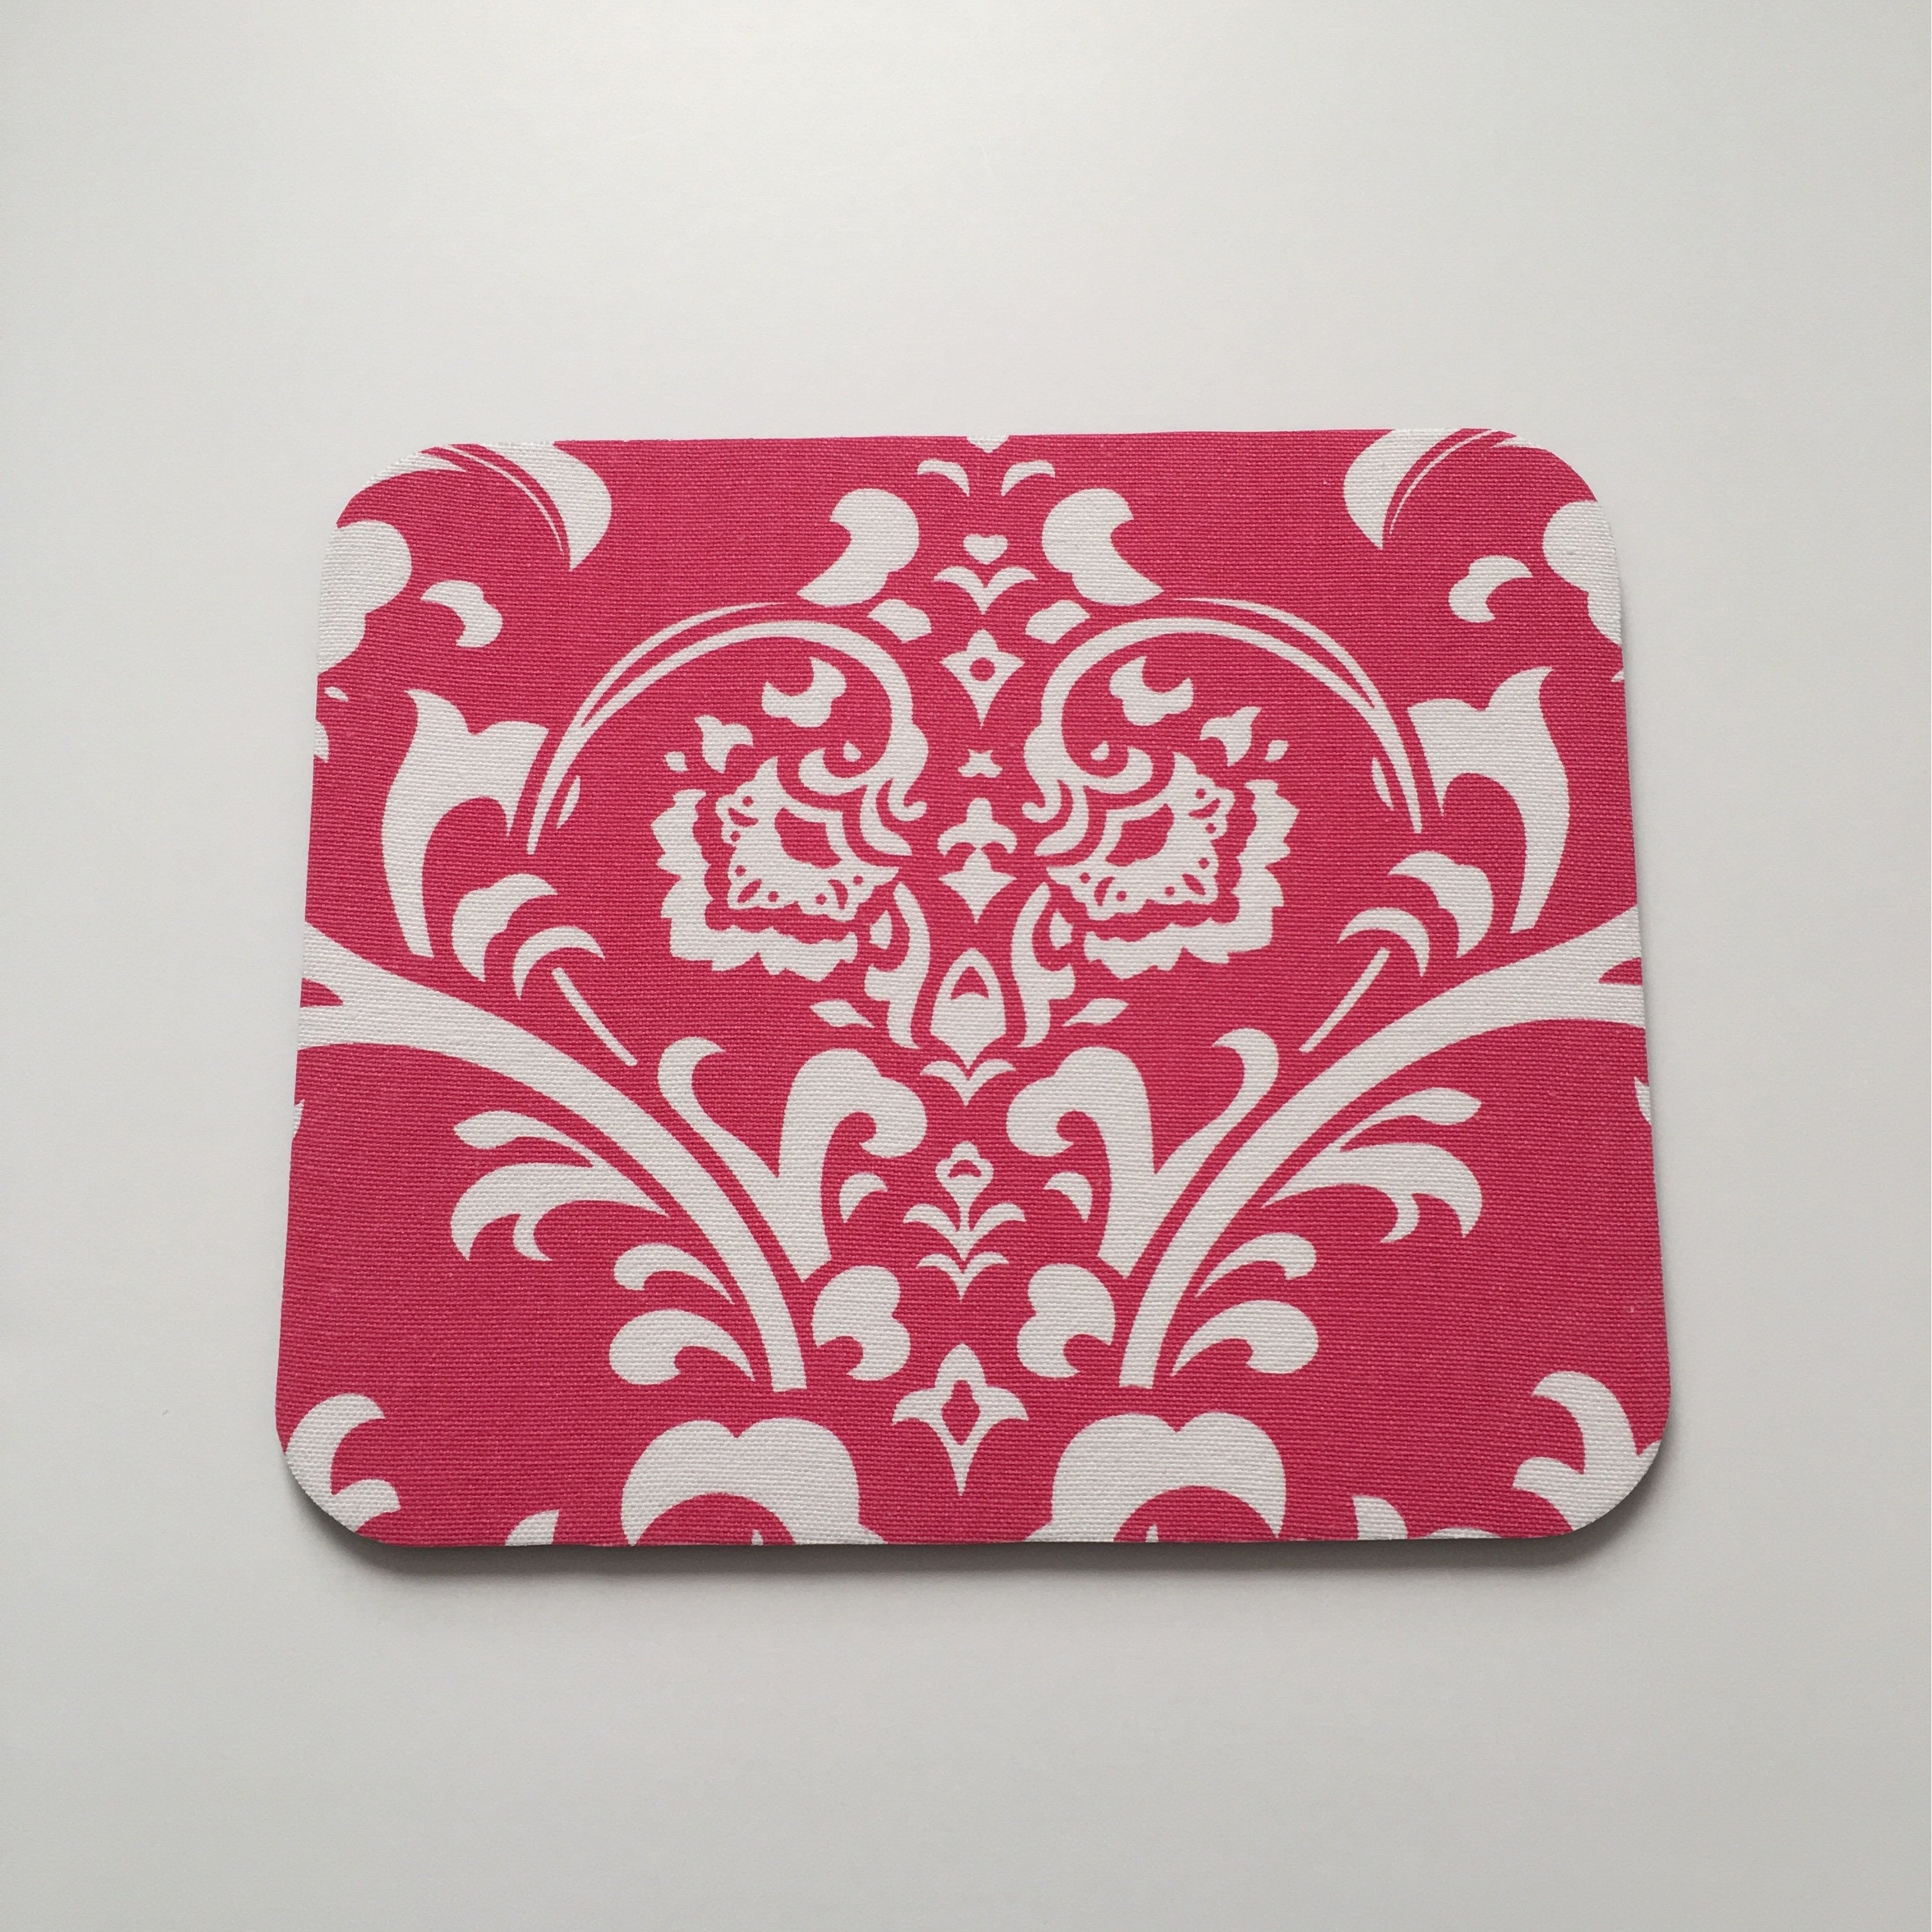 Hot Pink And White Damask Mouse Pad High Quality Office Desk